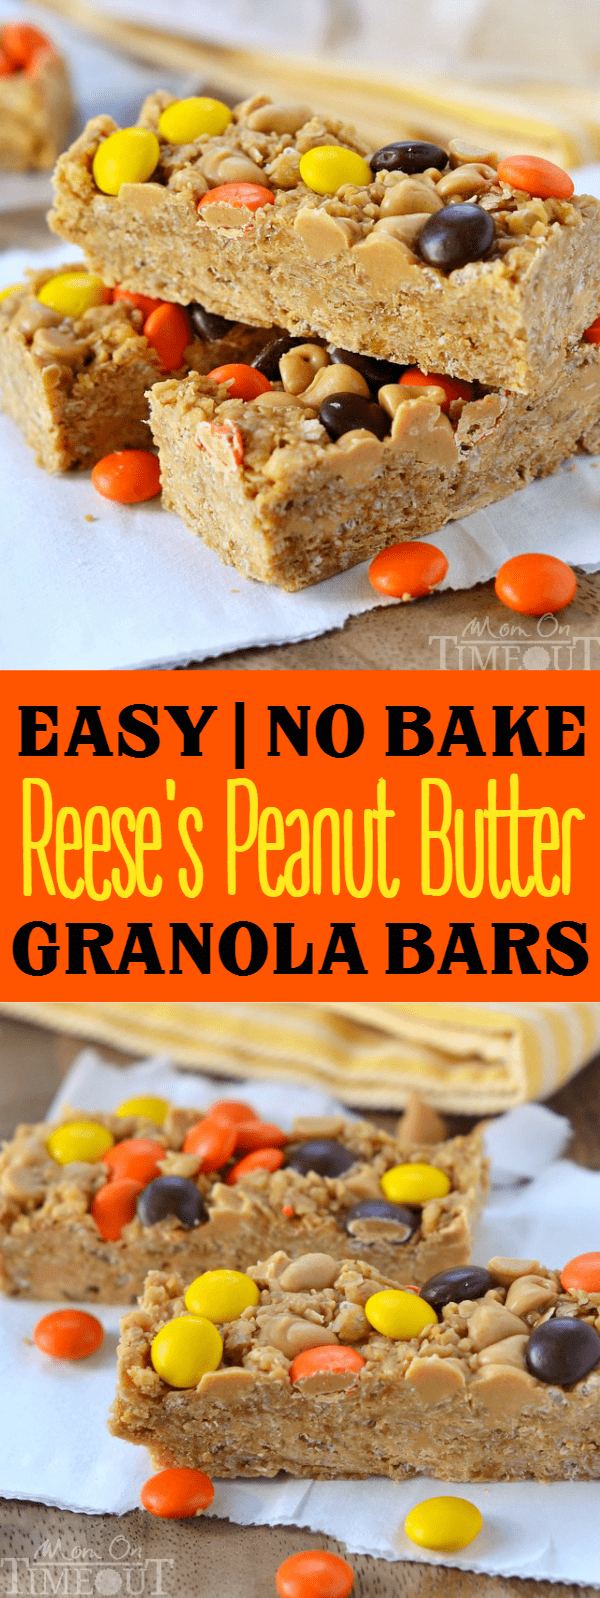 These easy no-bake Reese's Peanut Butter Granola Bars are hard to resist for kids and adults alike! Packed with delicious peanut butter flavor and topped with Reese's Pieces, these bars are truly eye candy! | MomOnTimeout.com